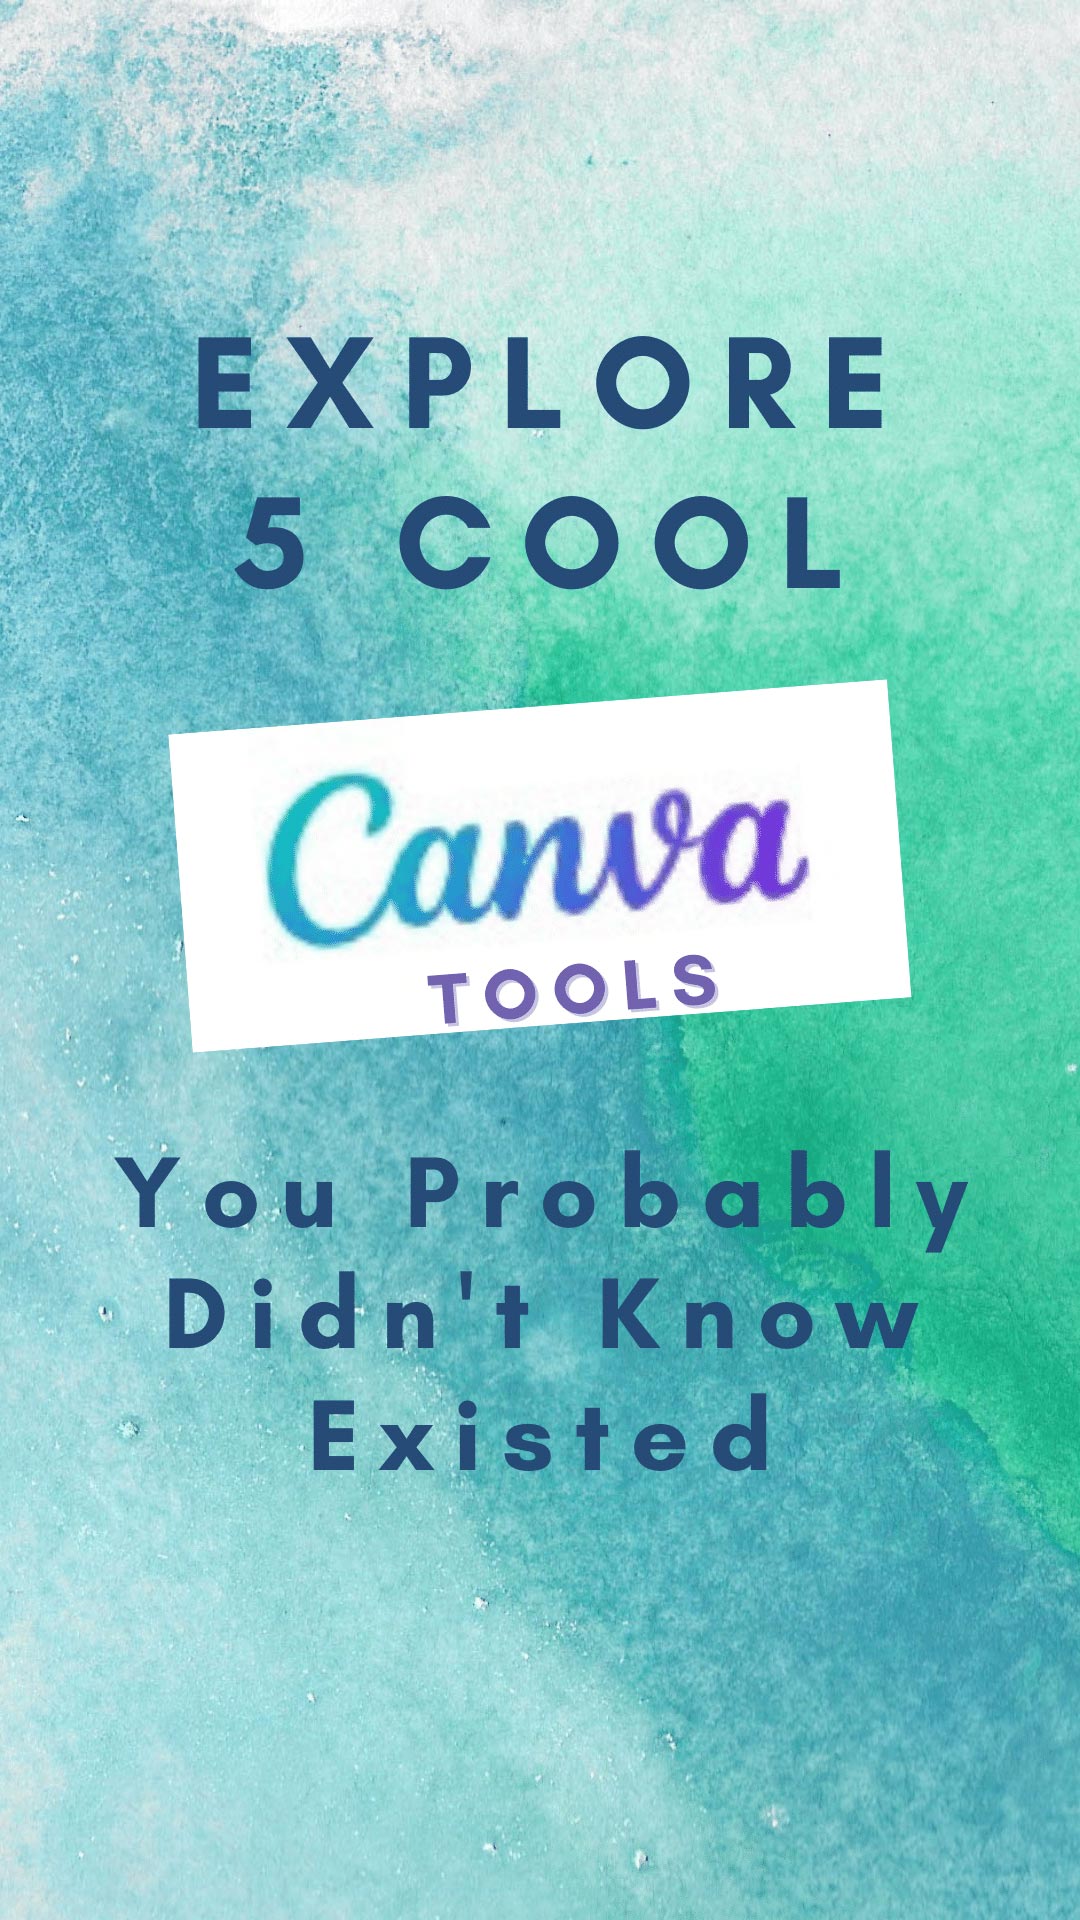 Explore 5 Cool Canva Tools You Probably Didn’t Know Existed